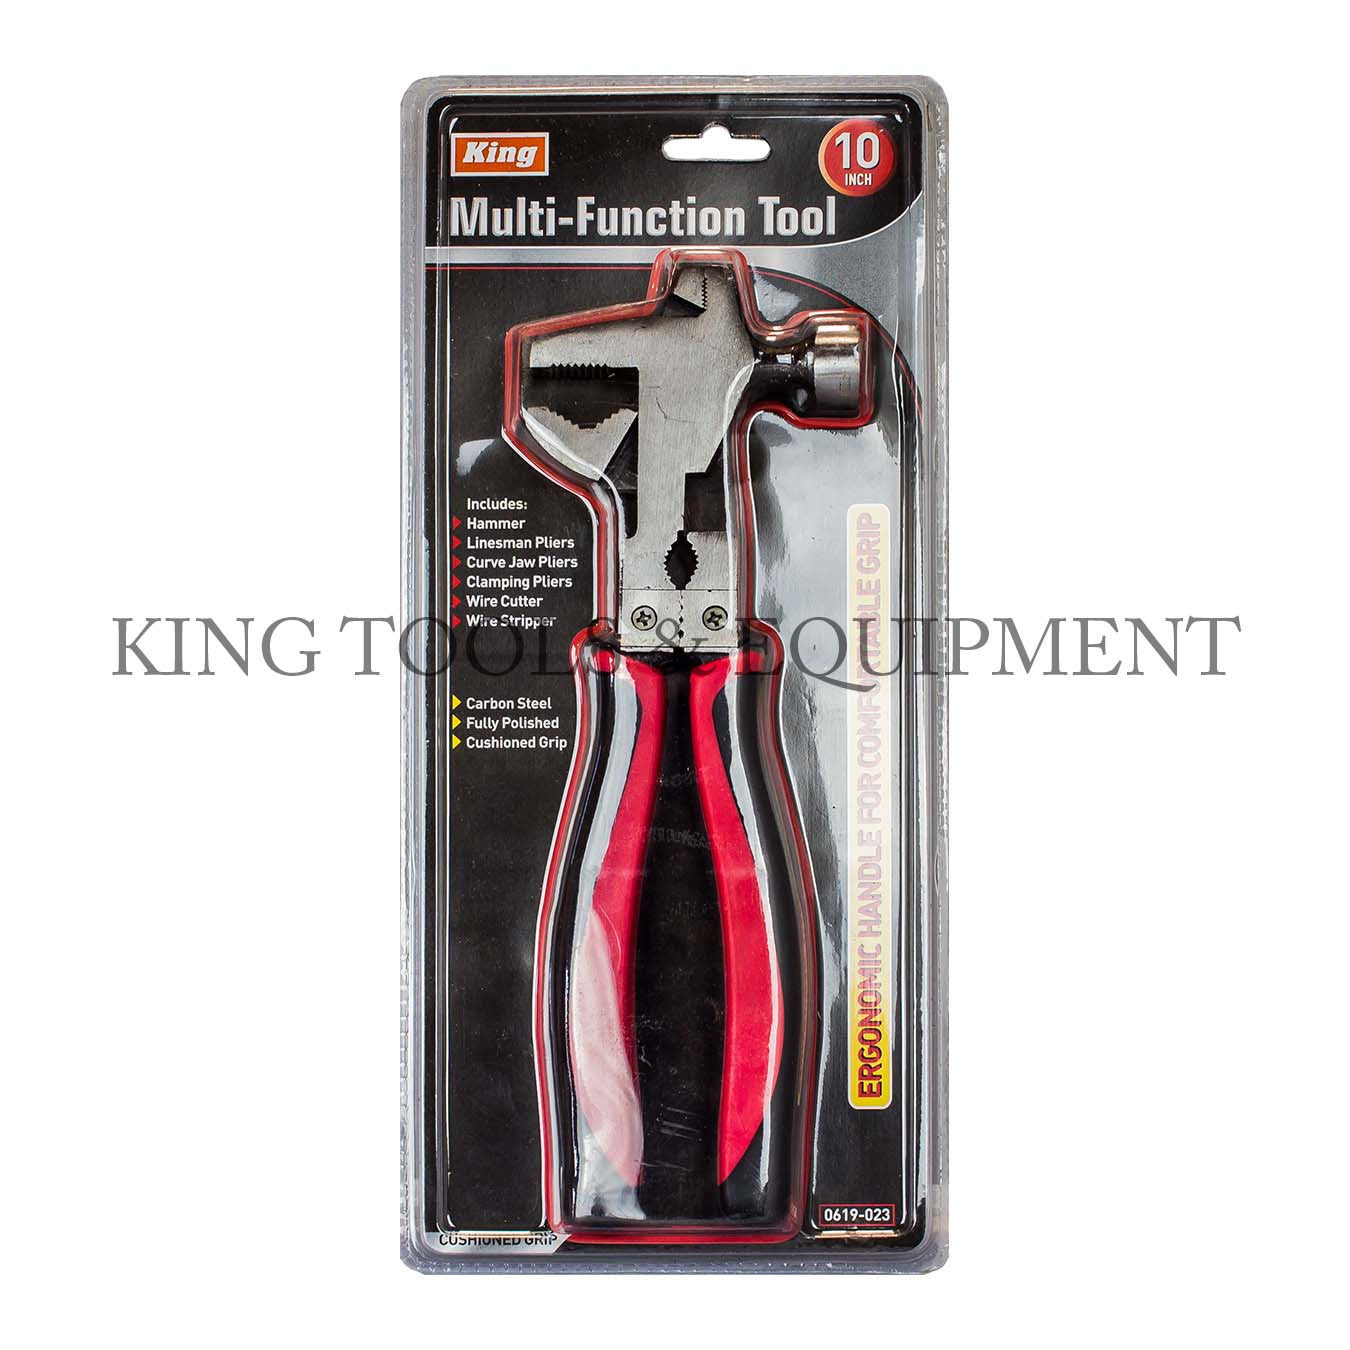 king tool and equipment